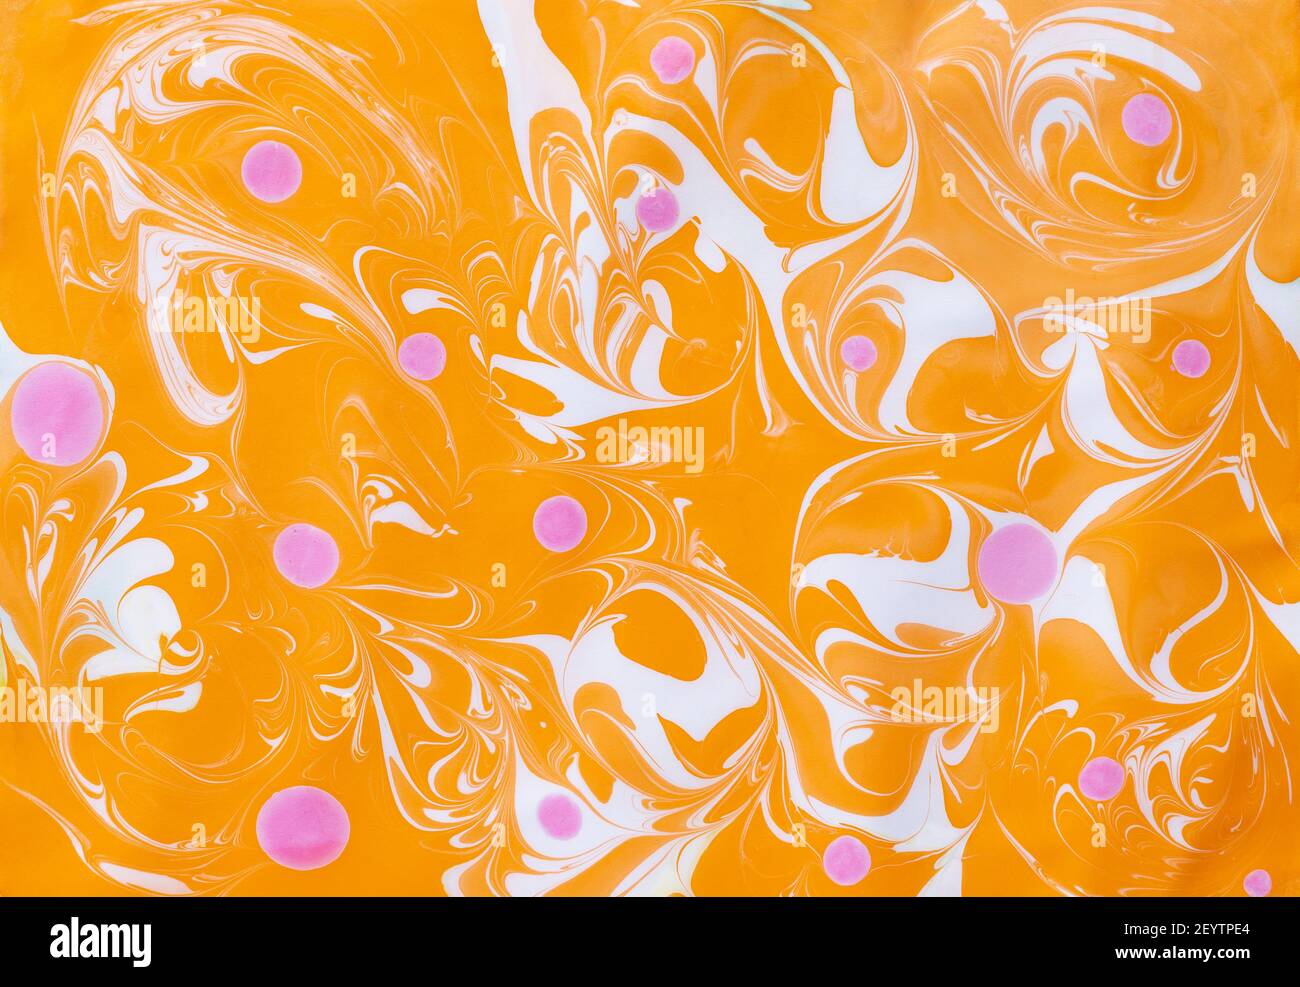 Abstract marbling ebru colorful orange background with waves and pink blots Stock Photo